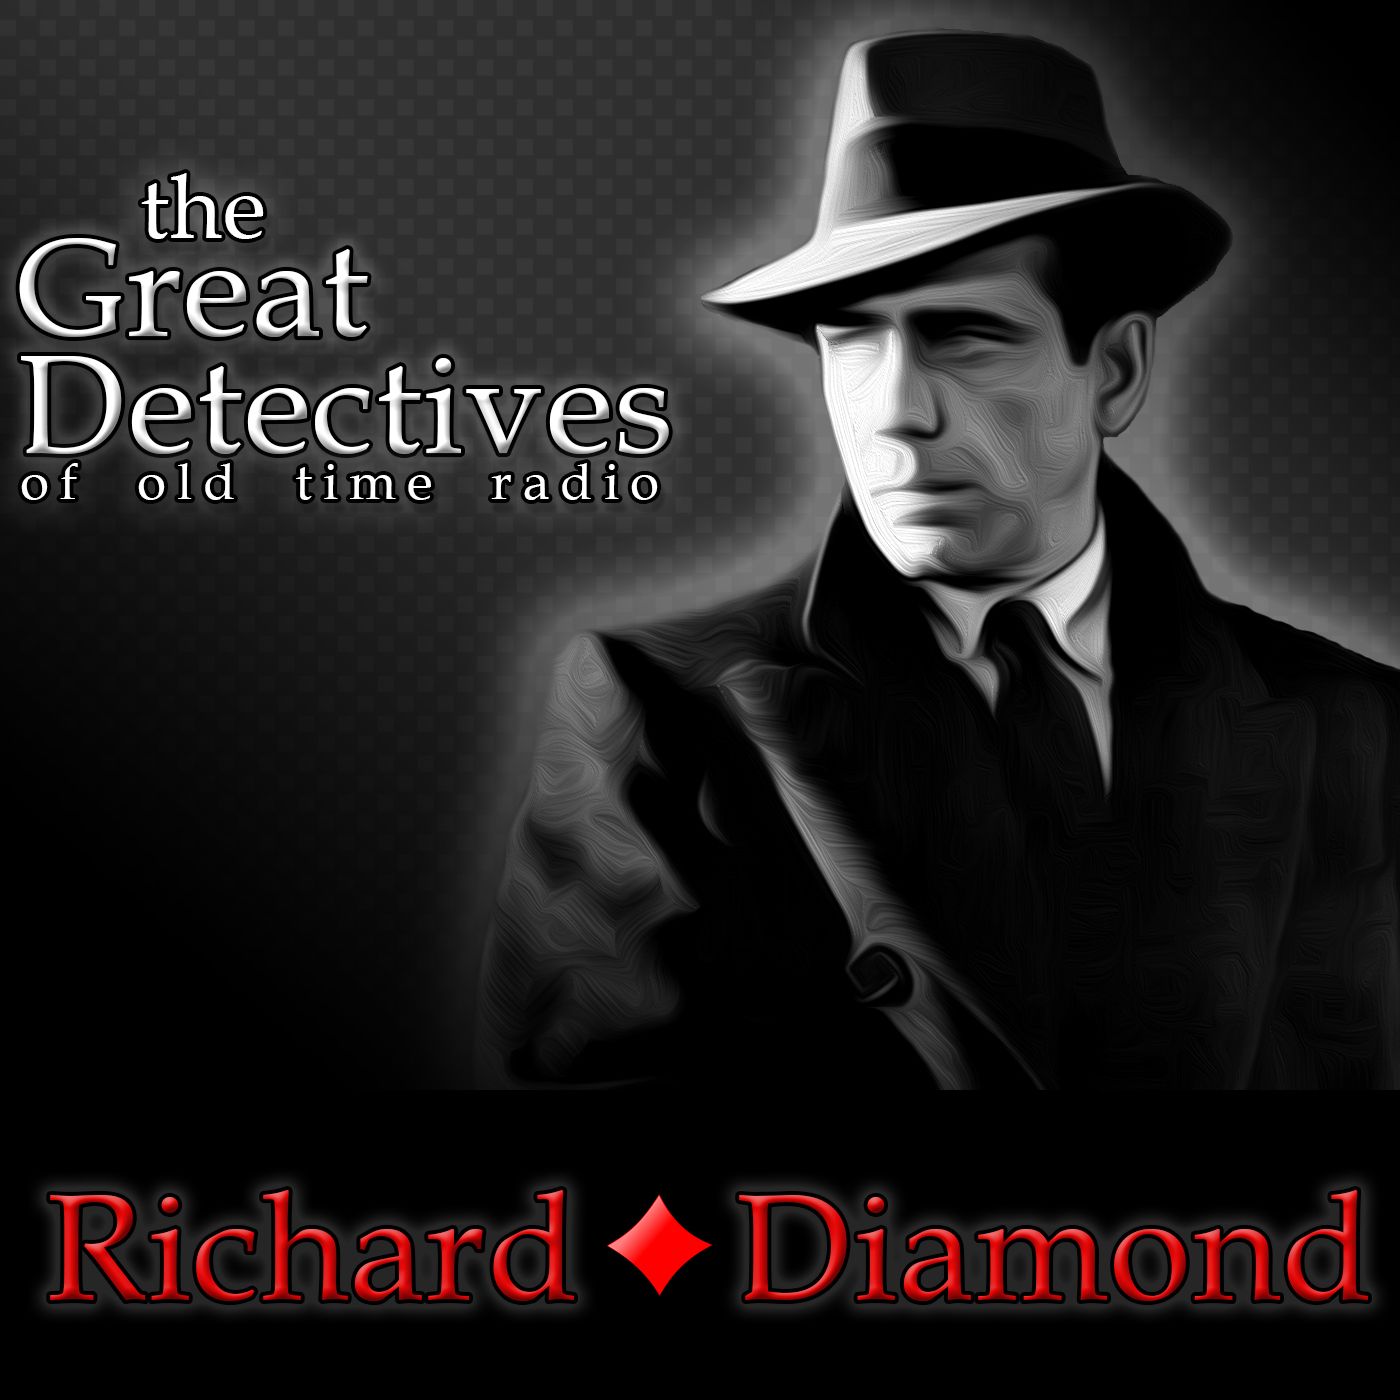 Richard Diamond – The Great Detectives of Old Time Radio